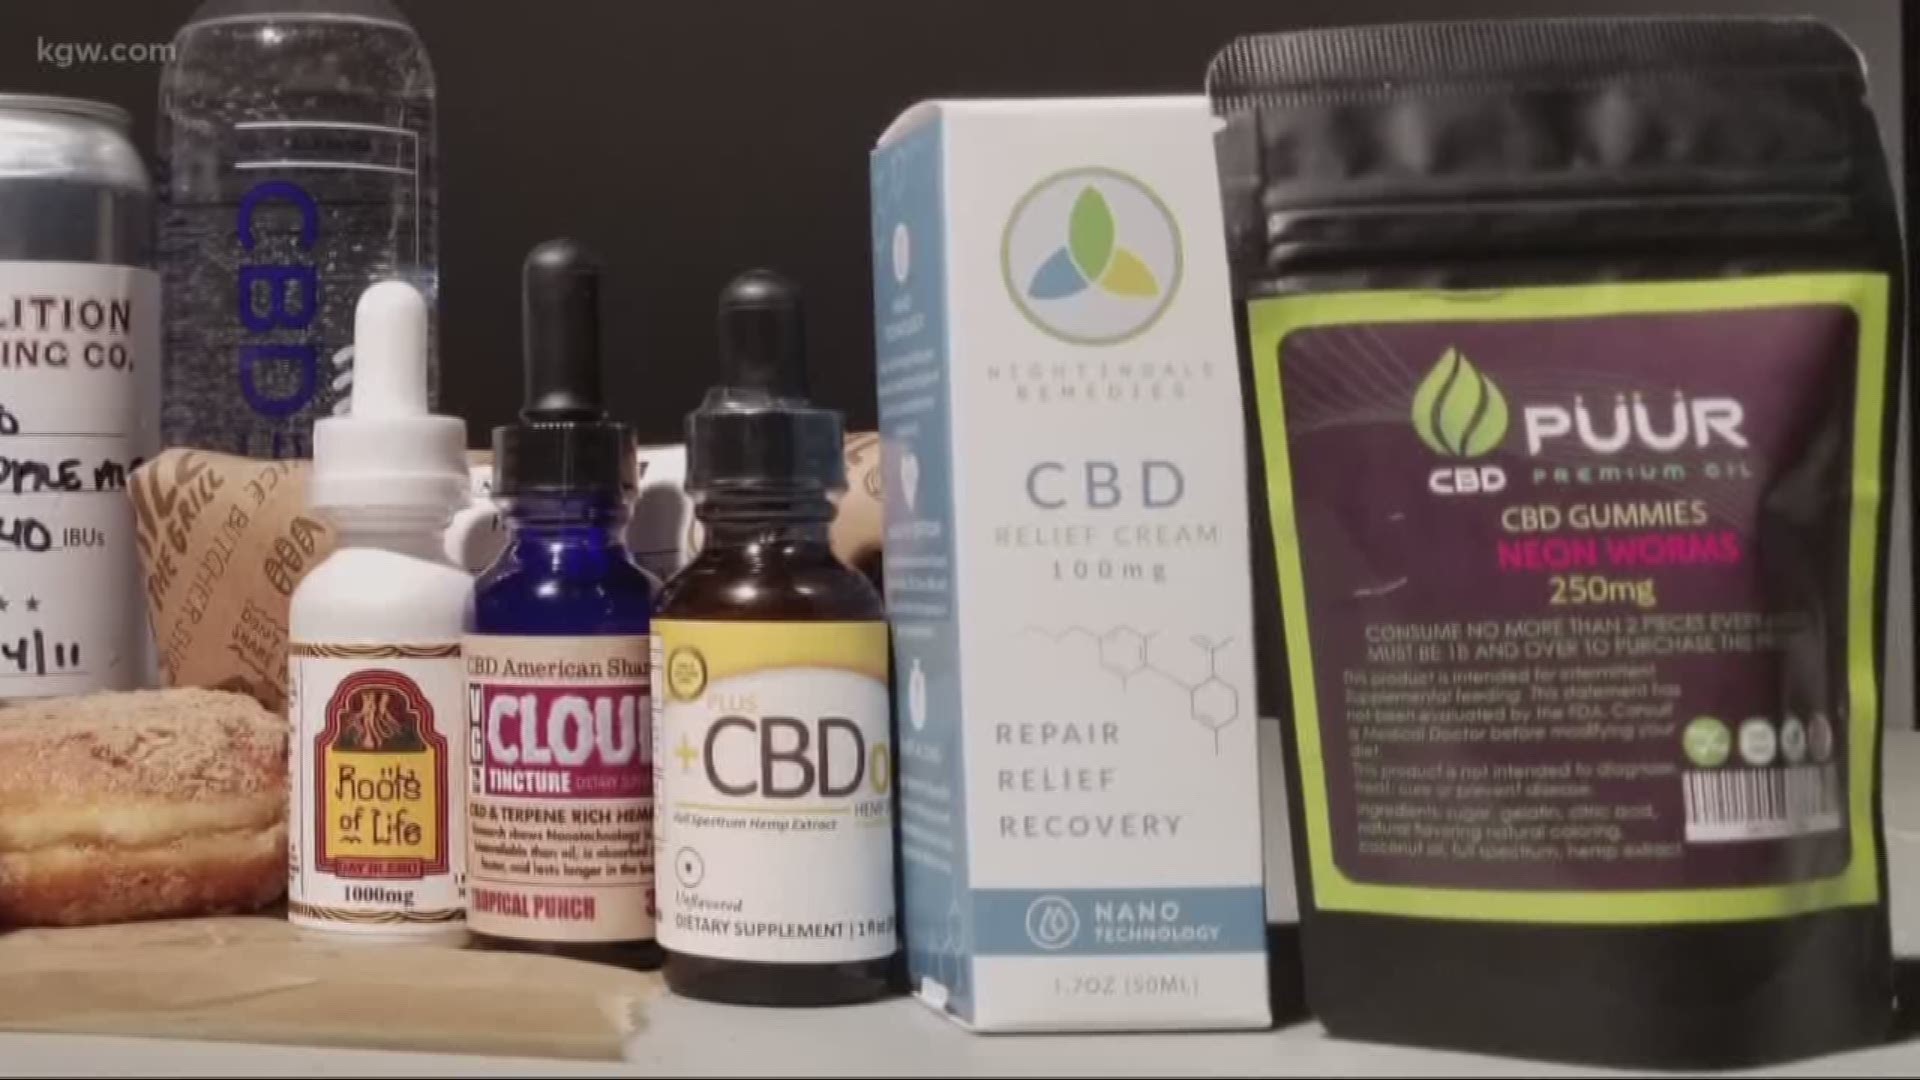 Is CBD allowed in food products in Washington?